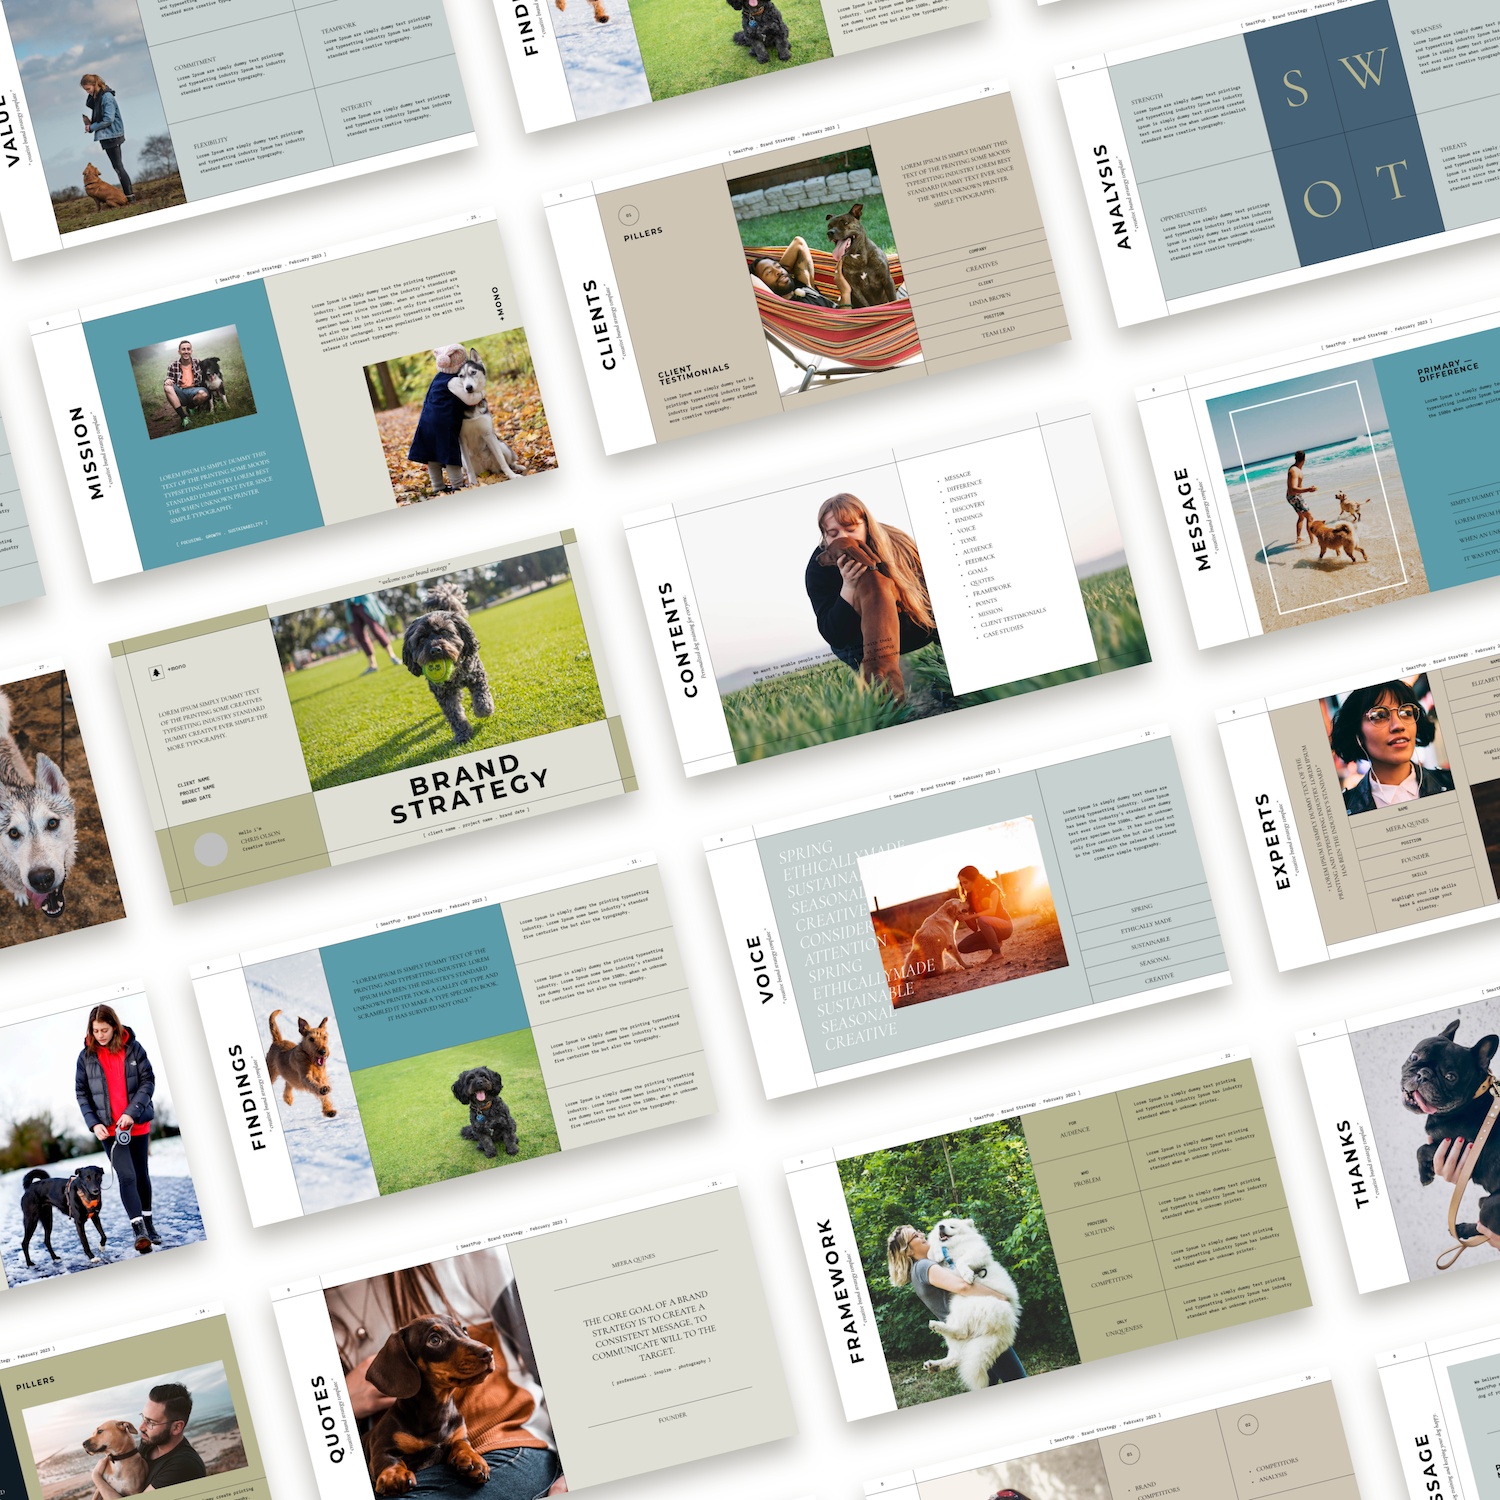 Brand strategy pitch deck for a dog training app.